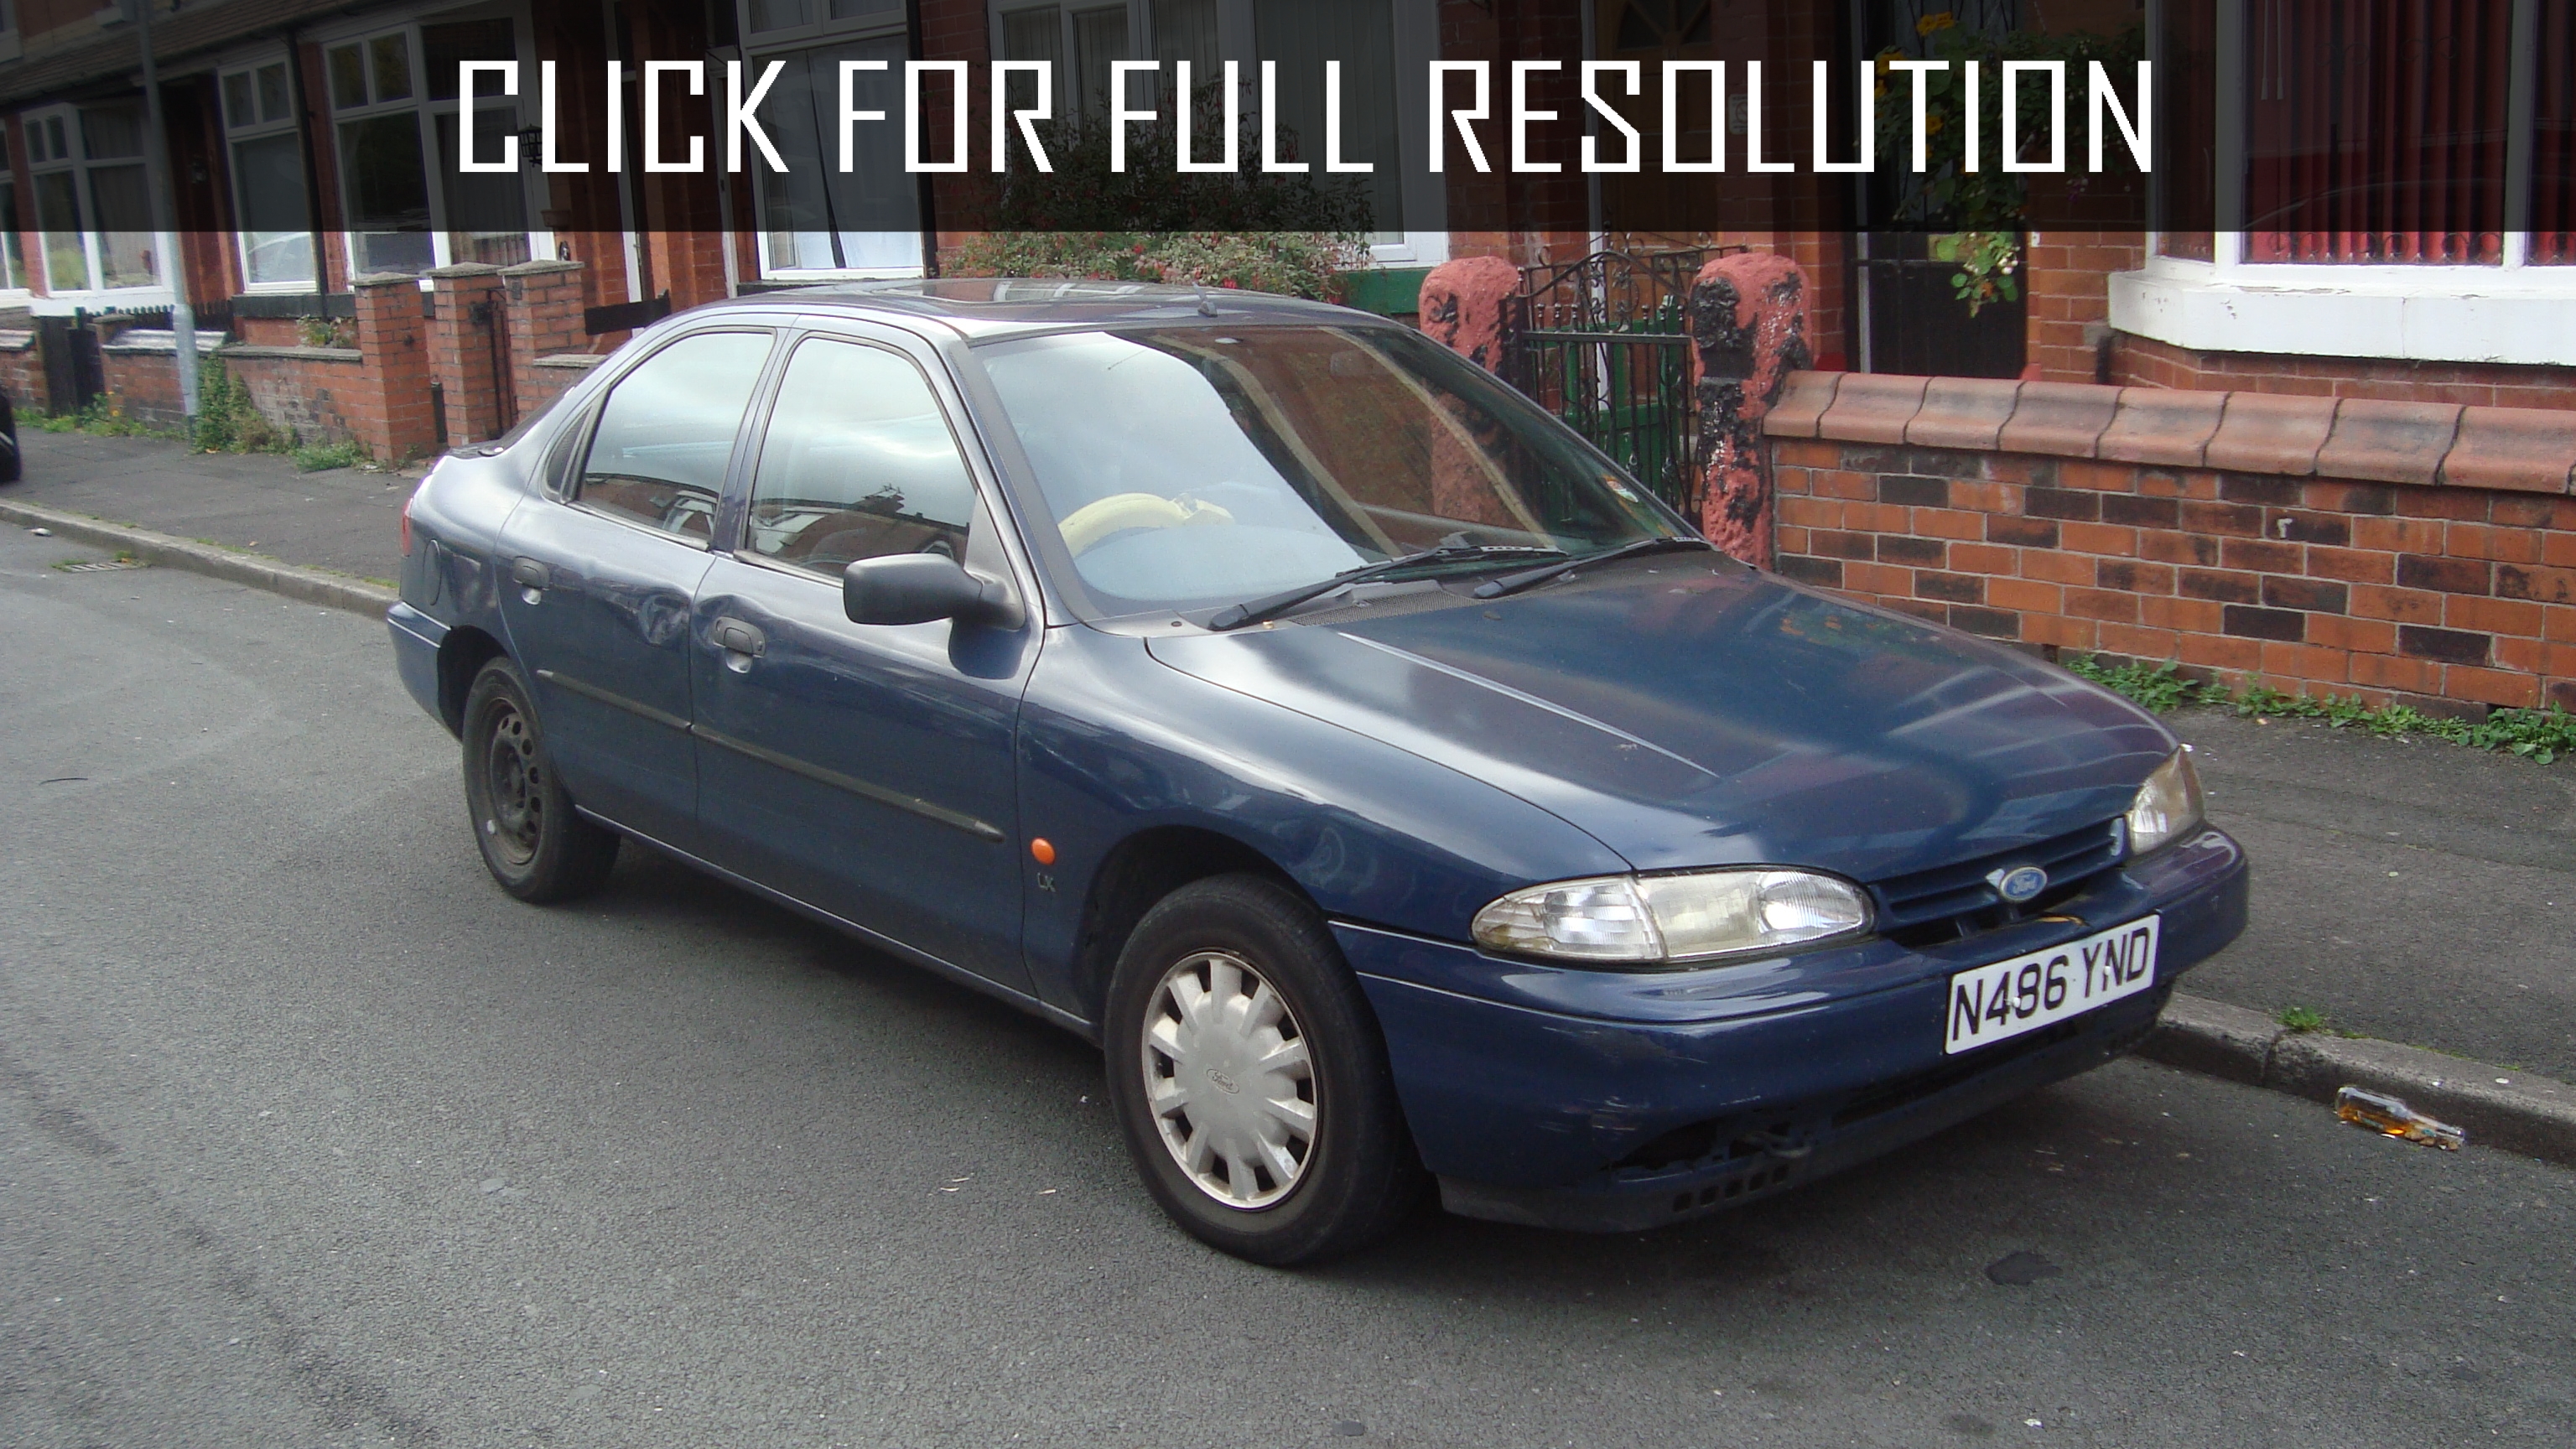 1995 Ford Mondeo